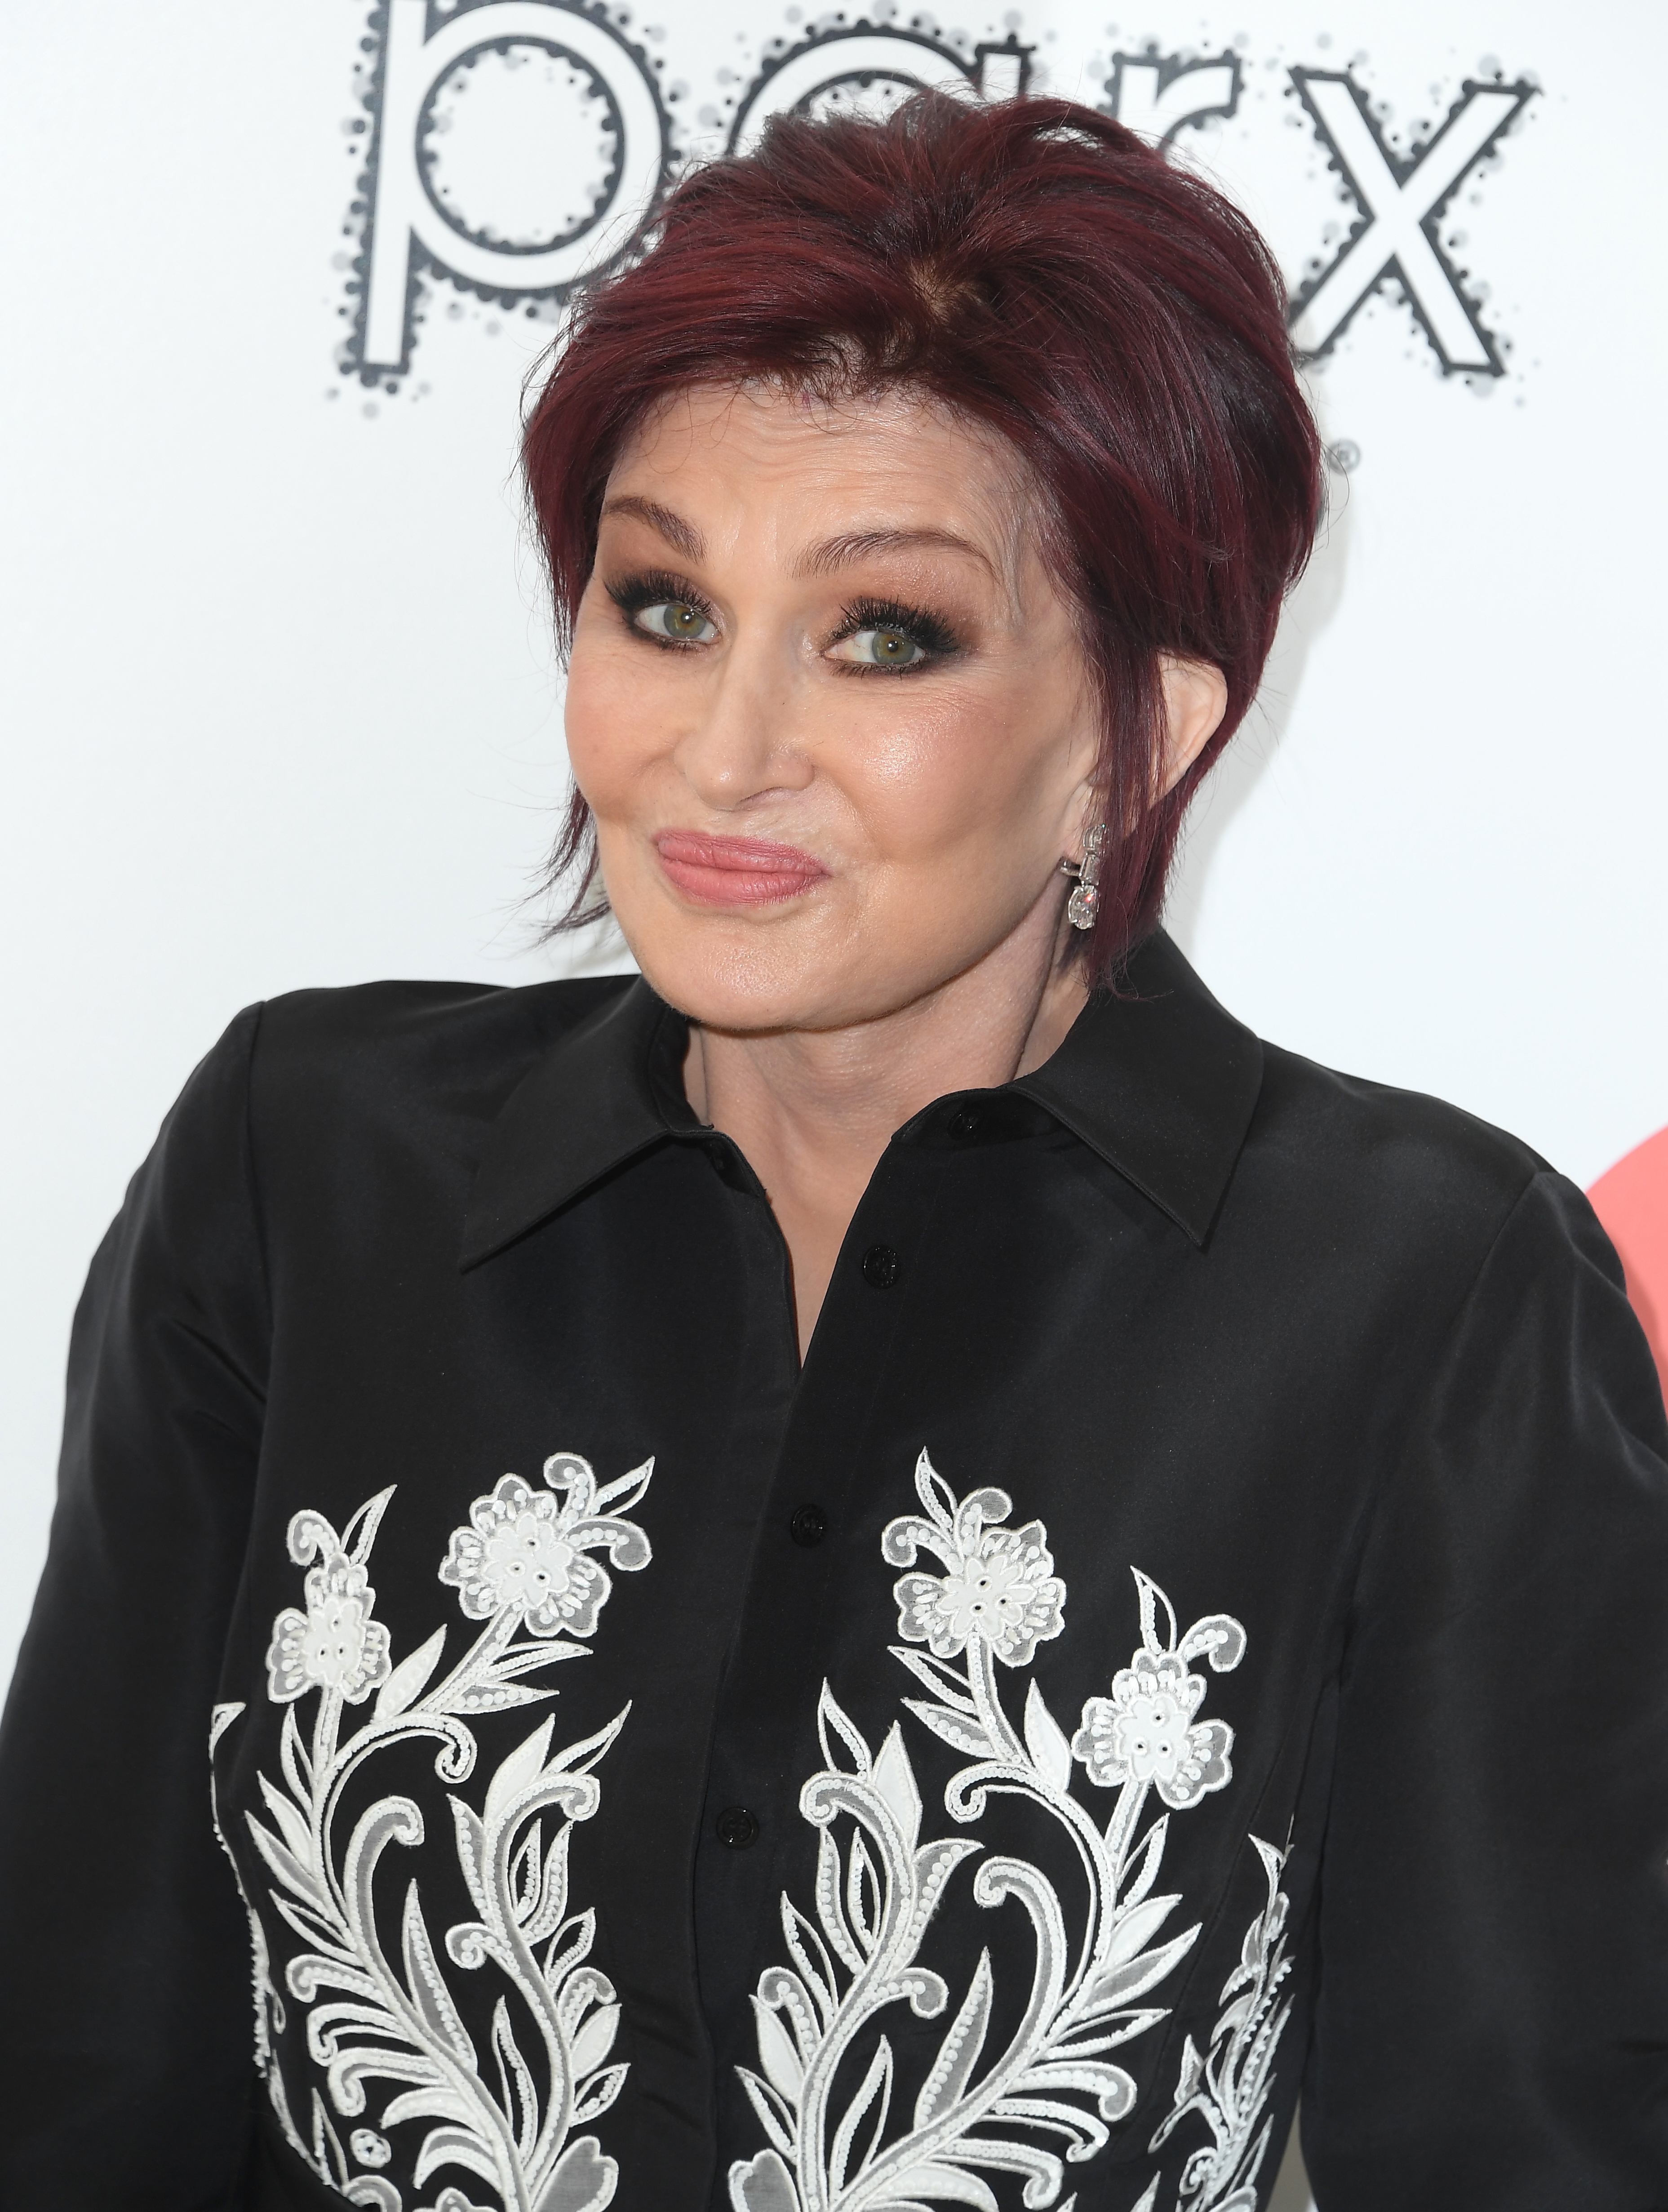 Sharon Osbourne at the Elton John AIDS Foundation's 30th Annual Academy Awards on March 27, 2022 in West Hollywood, California | Source: Getty Images